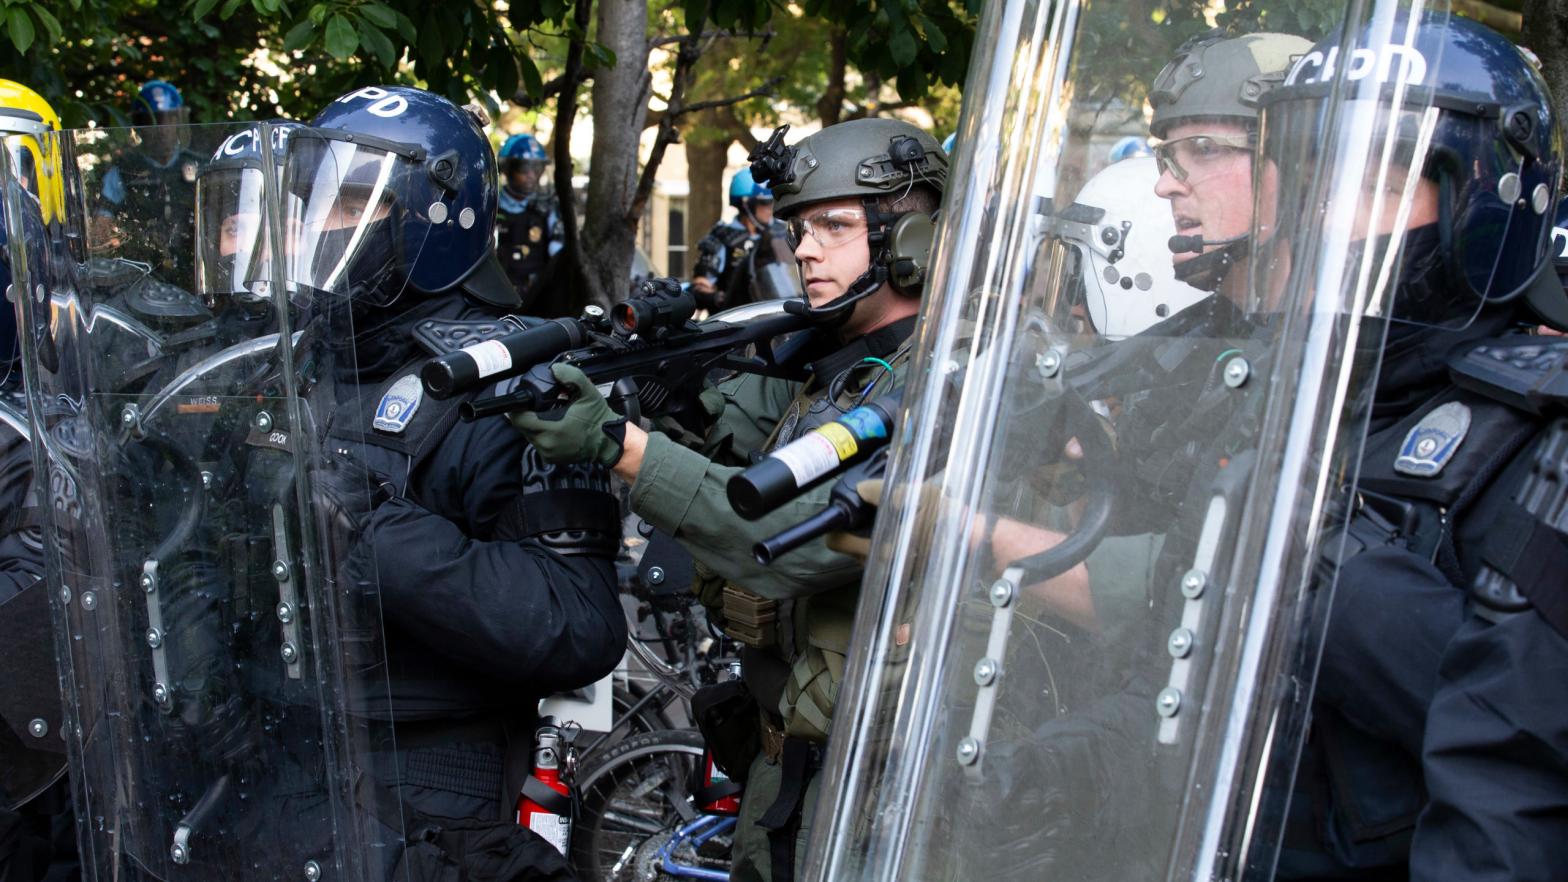 Police officers wearing riot gear shoot rubber bullets at demonstrators outside of the White House, June 1, 2020 in Washington D.C., during a protest over the police killing of George Floyd, an unarmed black man. (Photo: Getty)